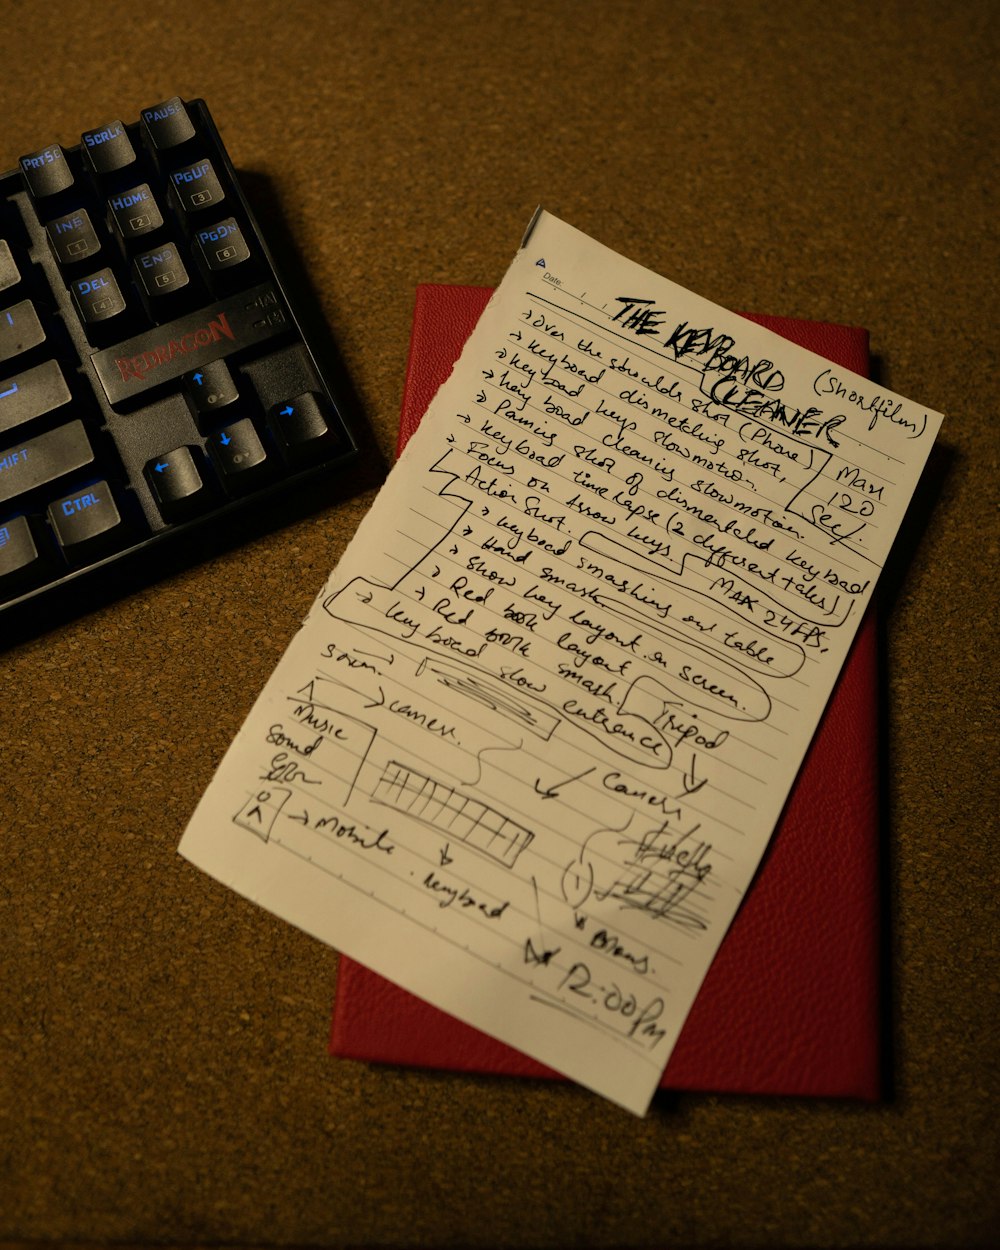 a piece of paper with writing on it next to a keyboard